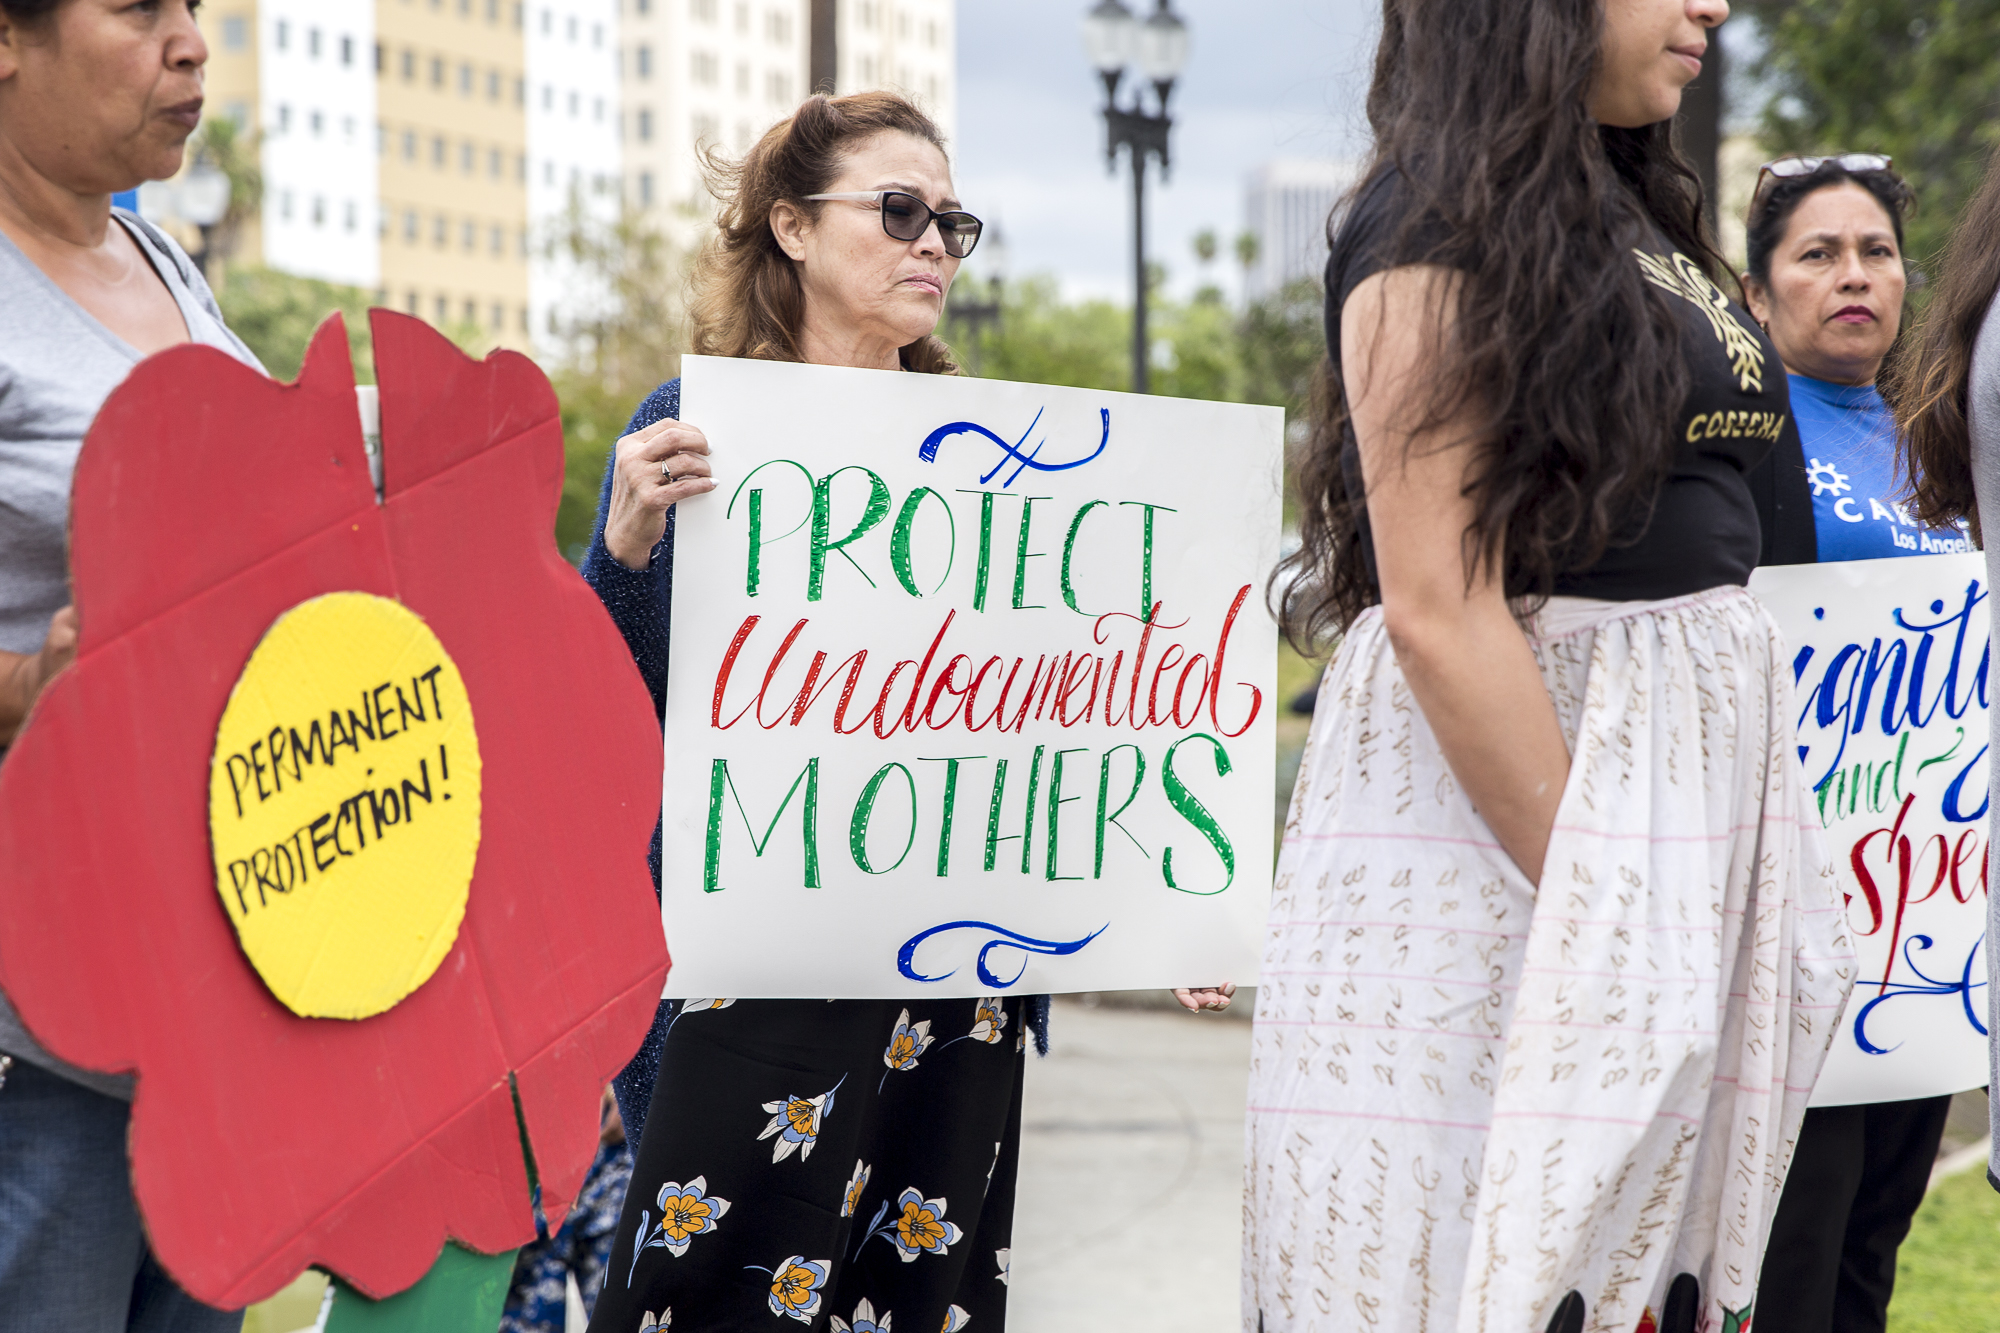  On the eve of Mother's Day, a group of undocumented immigrant mothers gather in MacArthur Park to protest against the Trump administration's hardline immigration policies in Los Angeles, California on Saturday, May 12 2018. The rally, organized by i